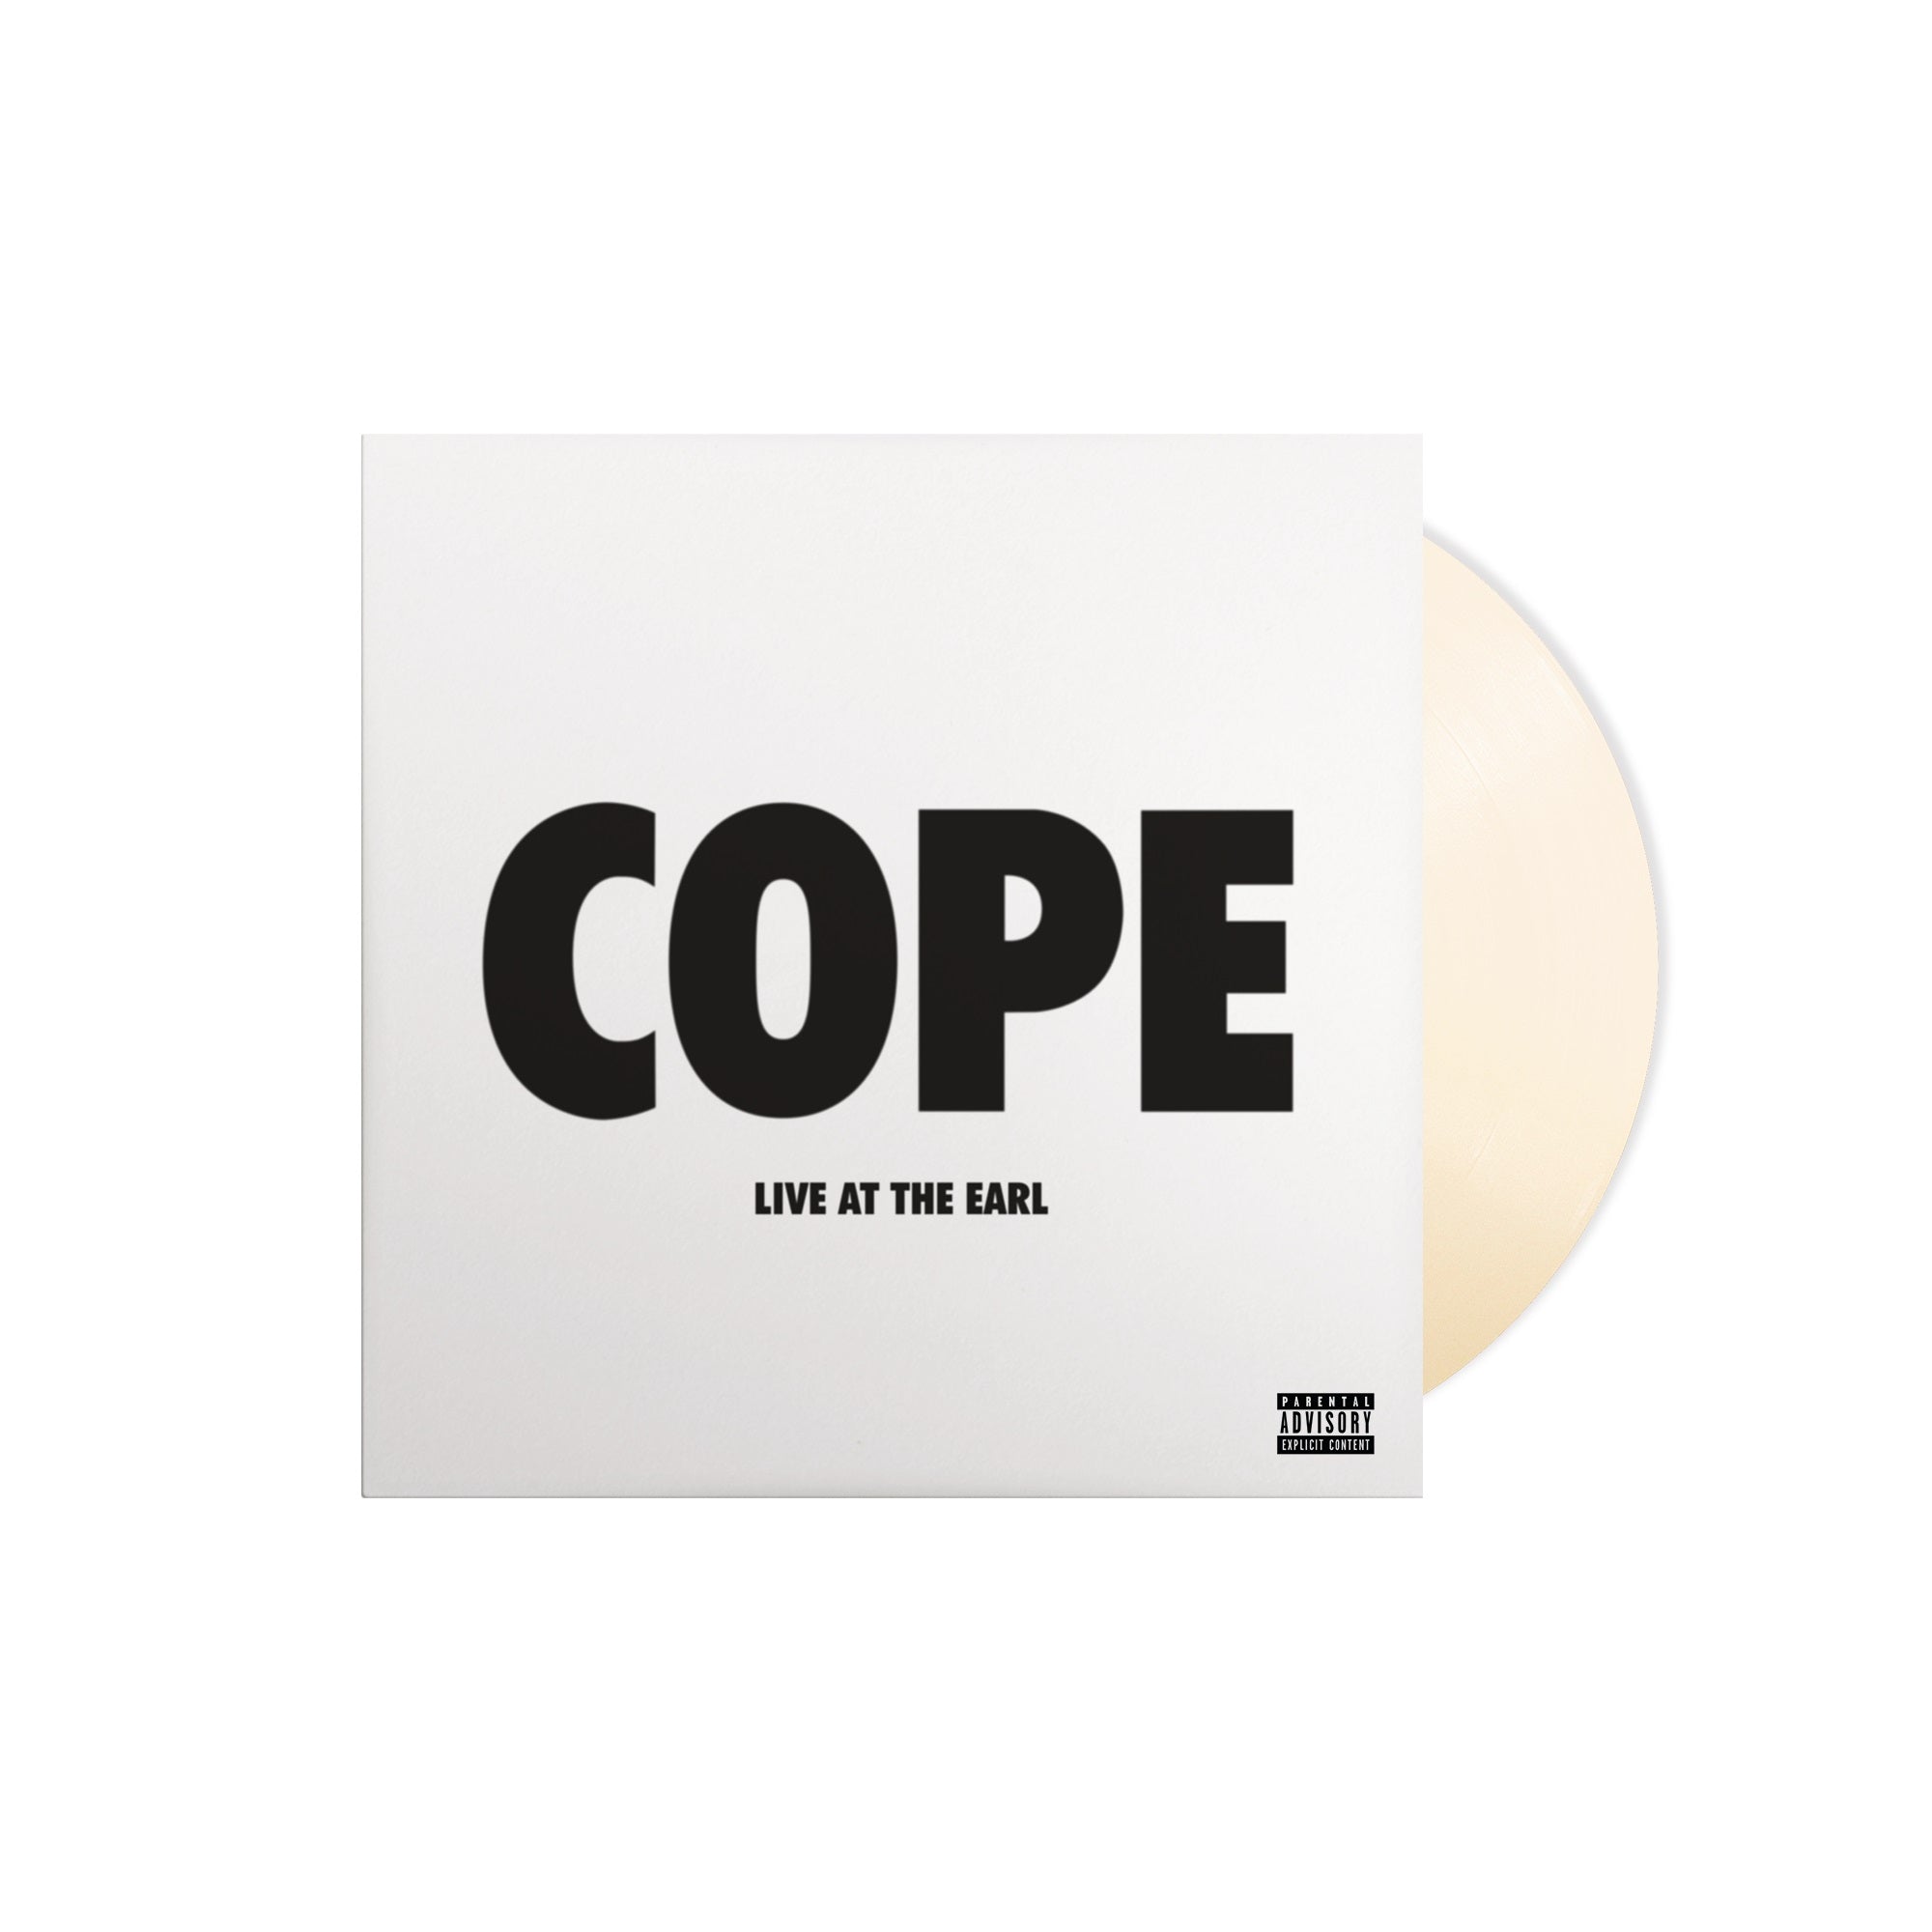 Manchester Orchestra- Cope - Live At The Earl [Bone LP] (Indie Exclusive) (PREORDER)